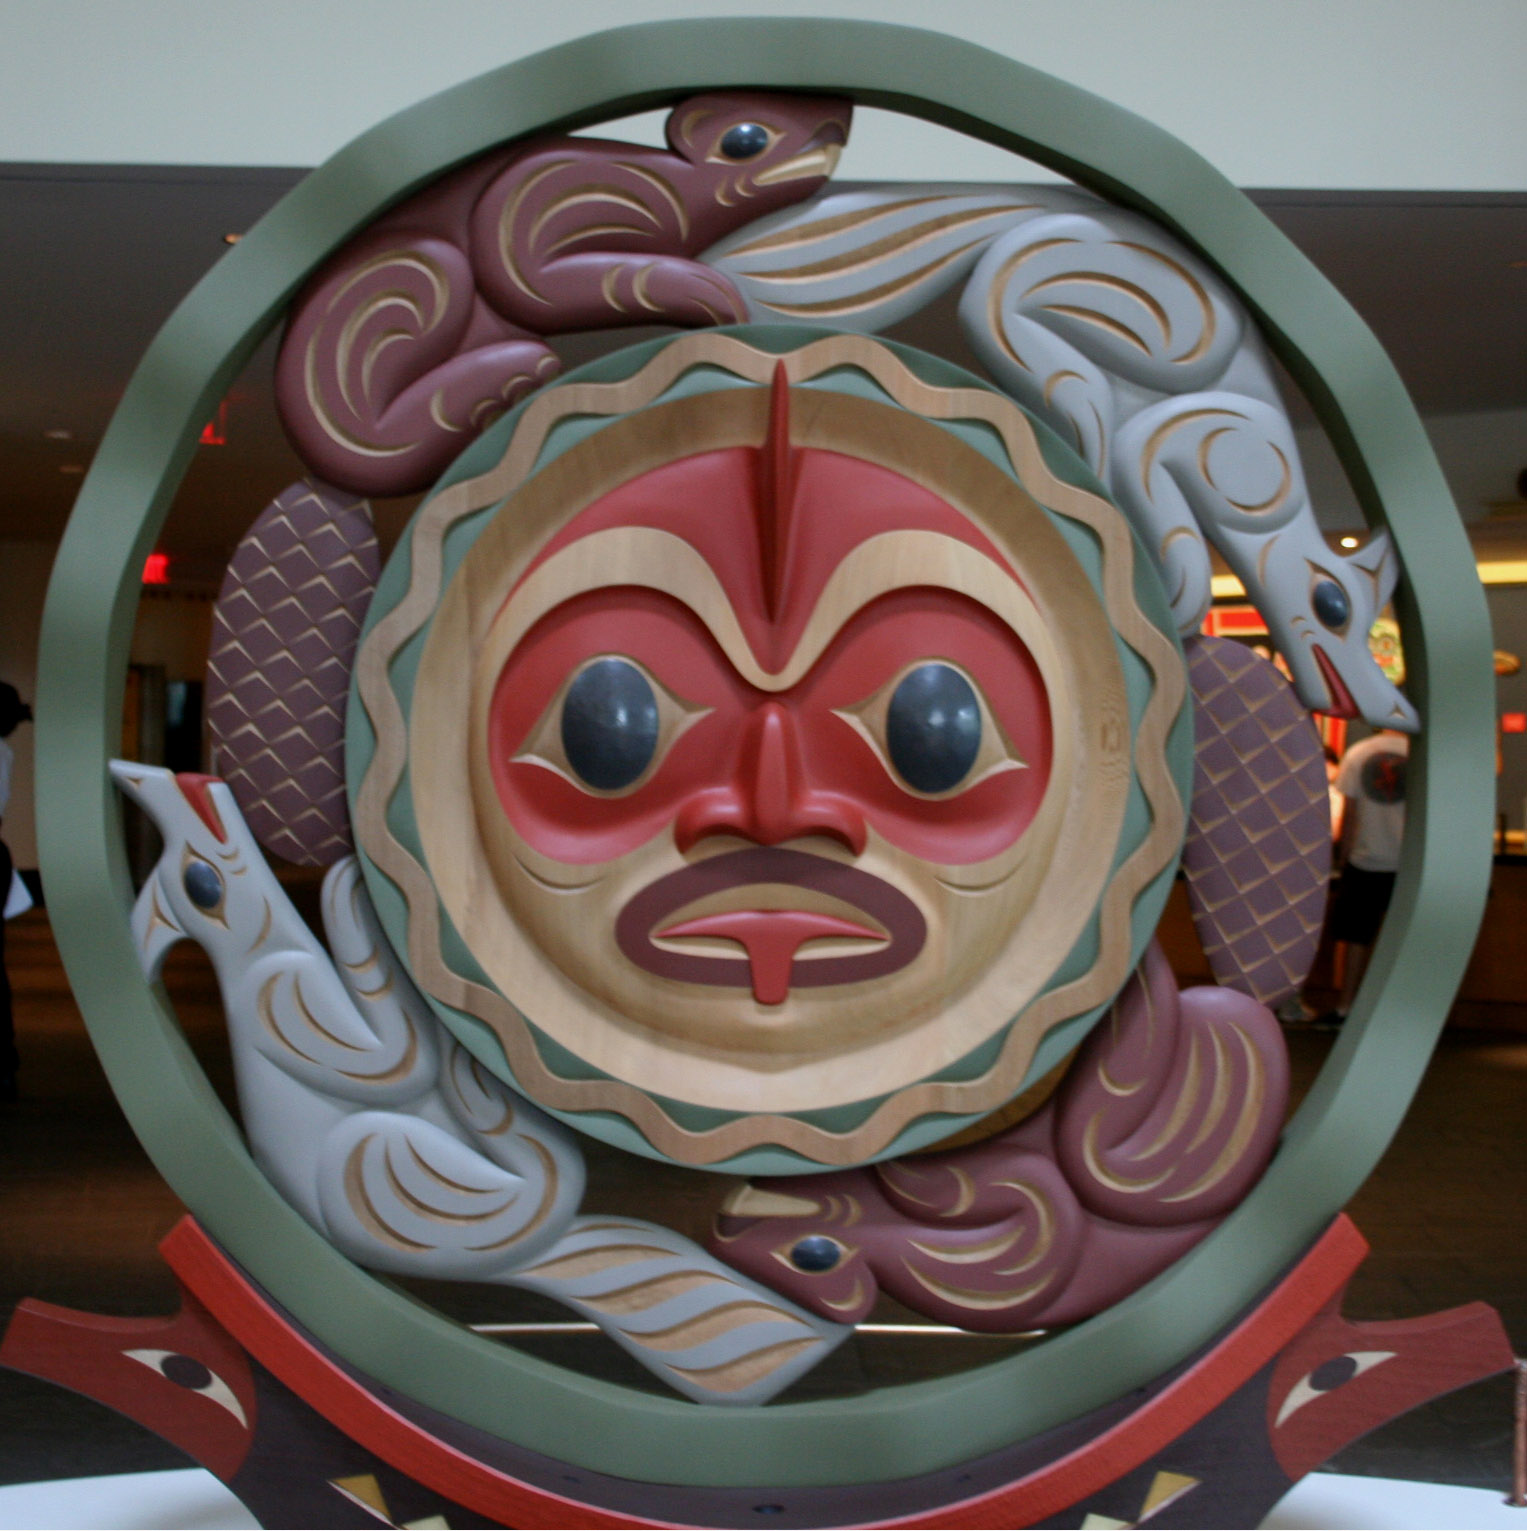 a colorful mask is displayed in front of a round object